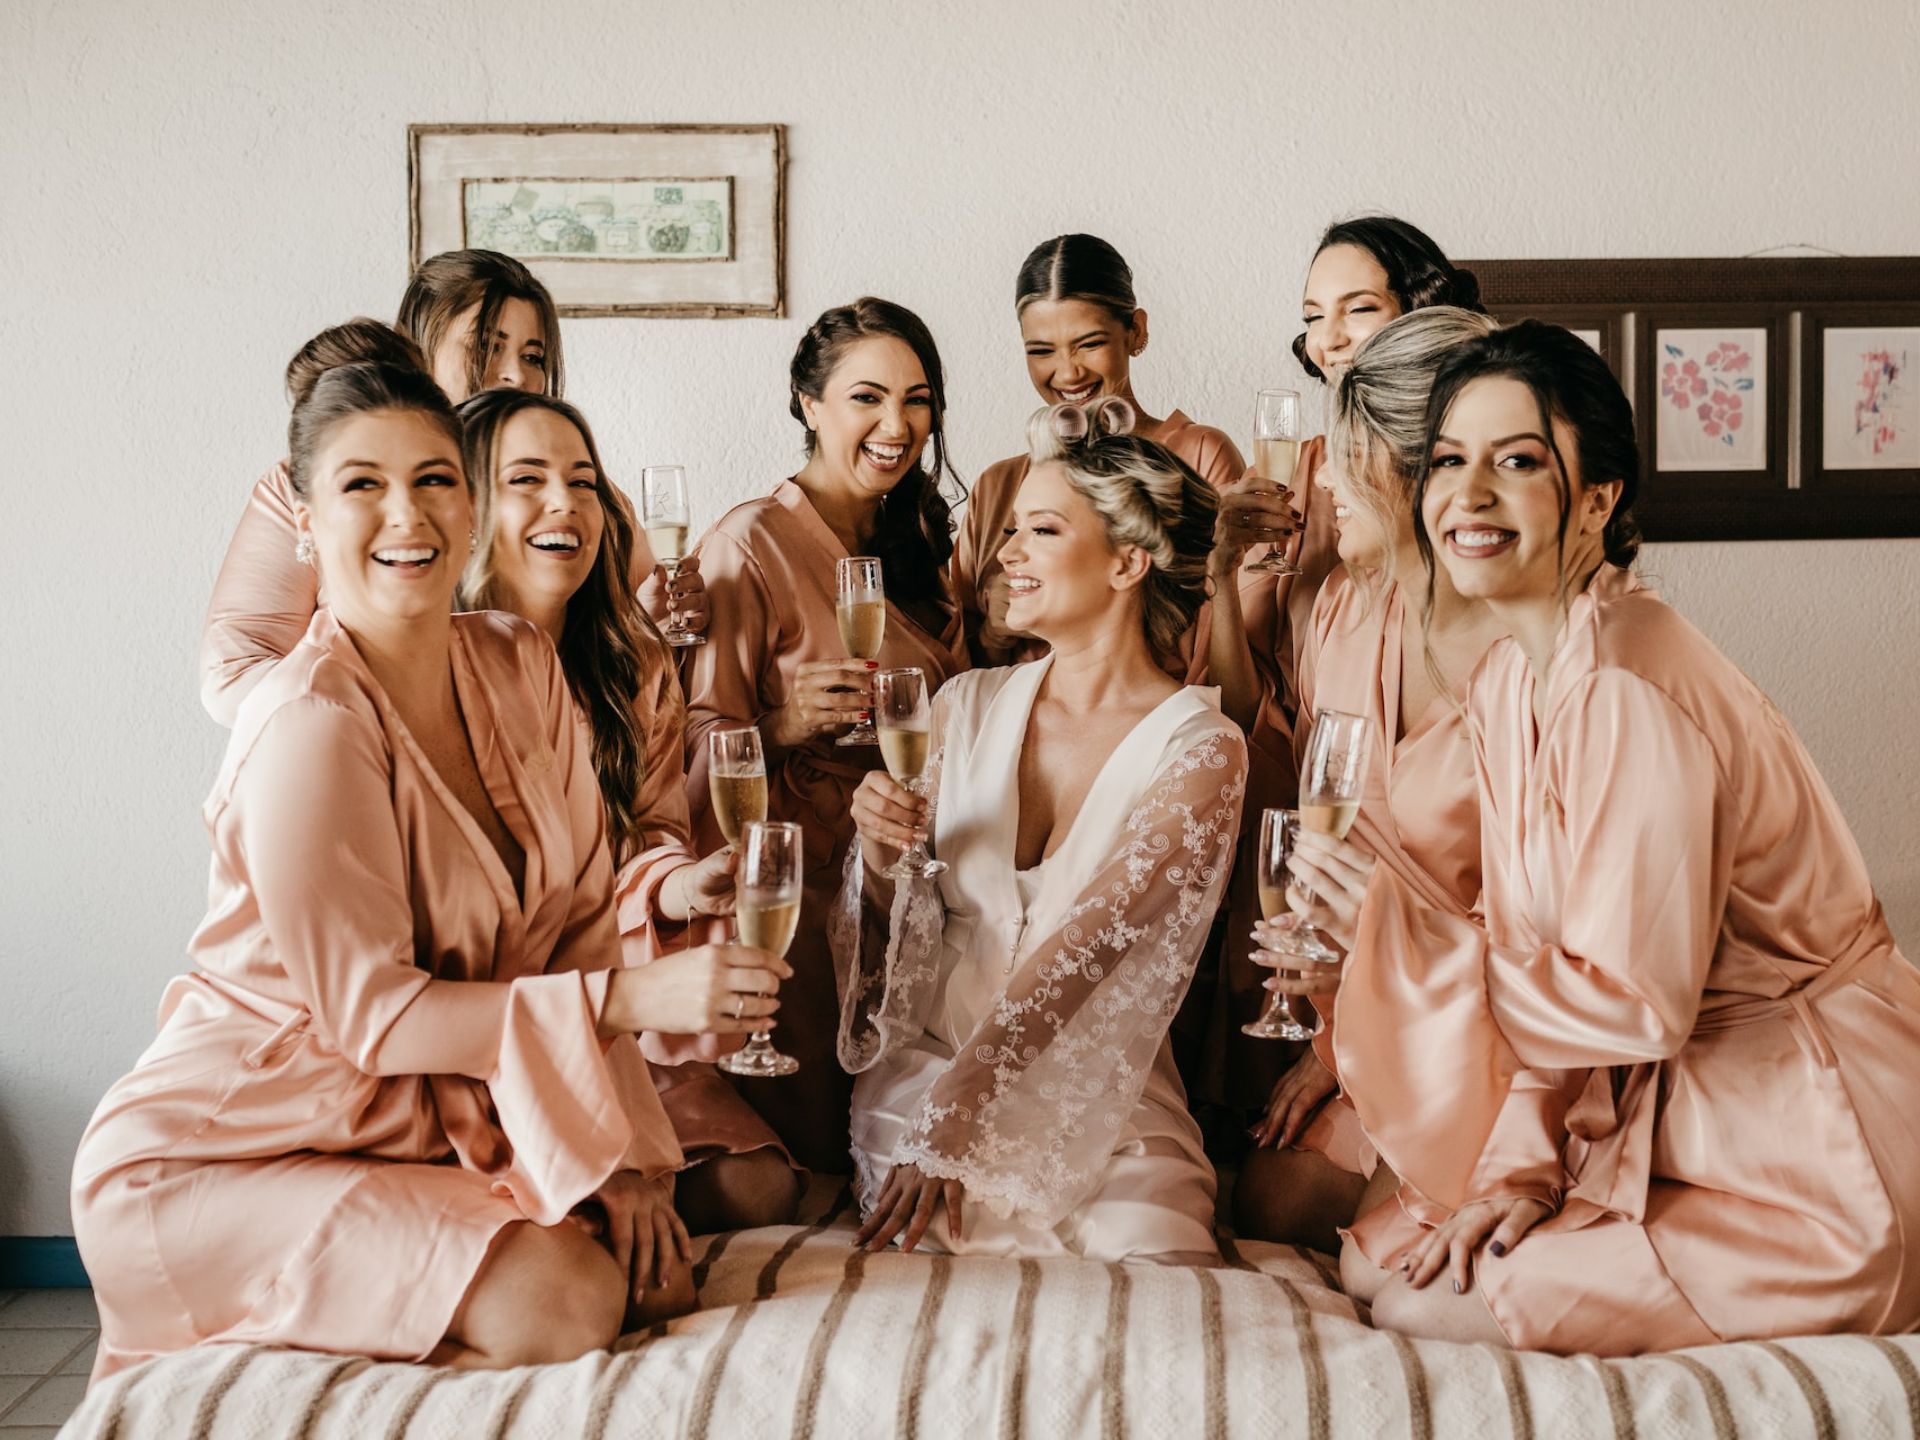 A bride and bridesmaids getting ready together.